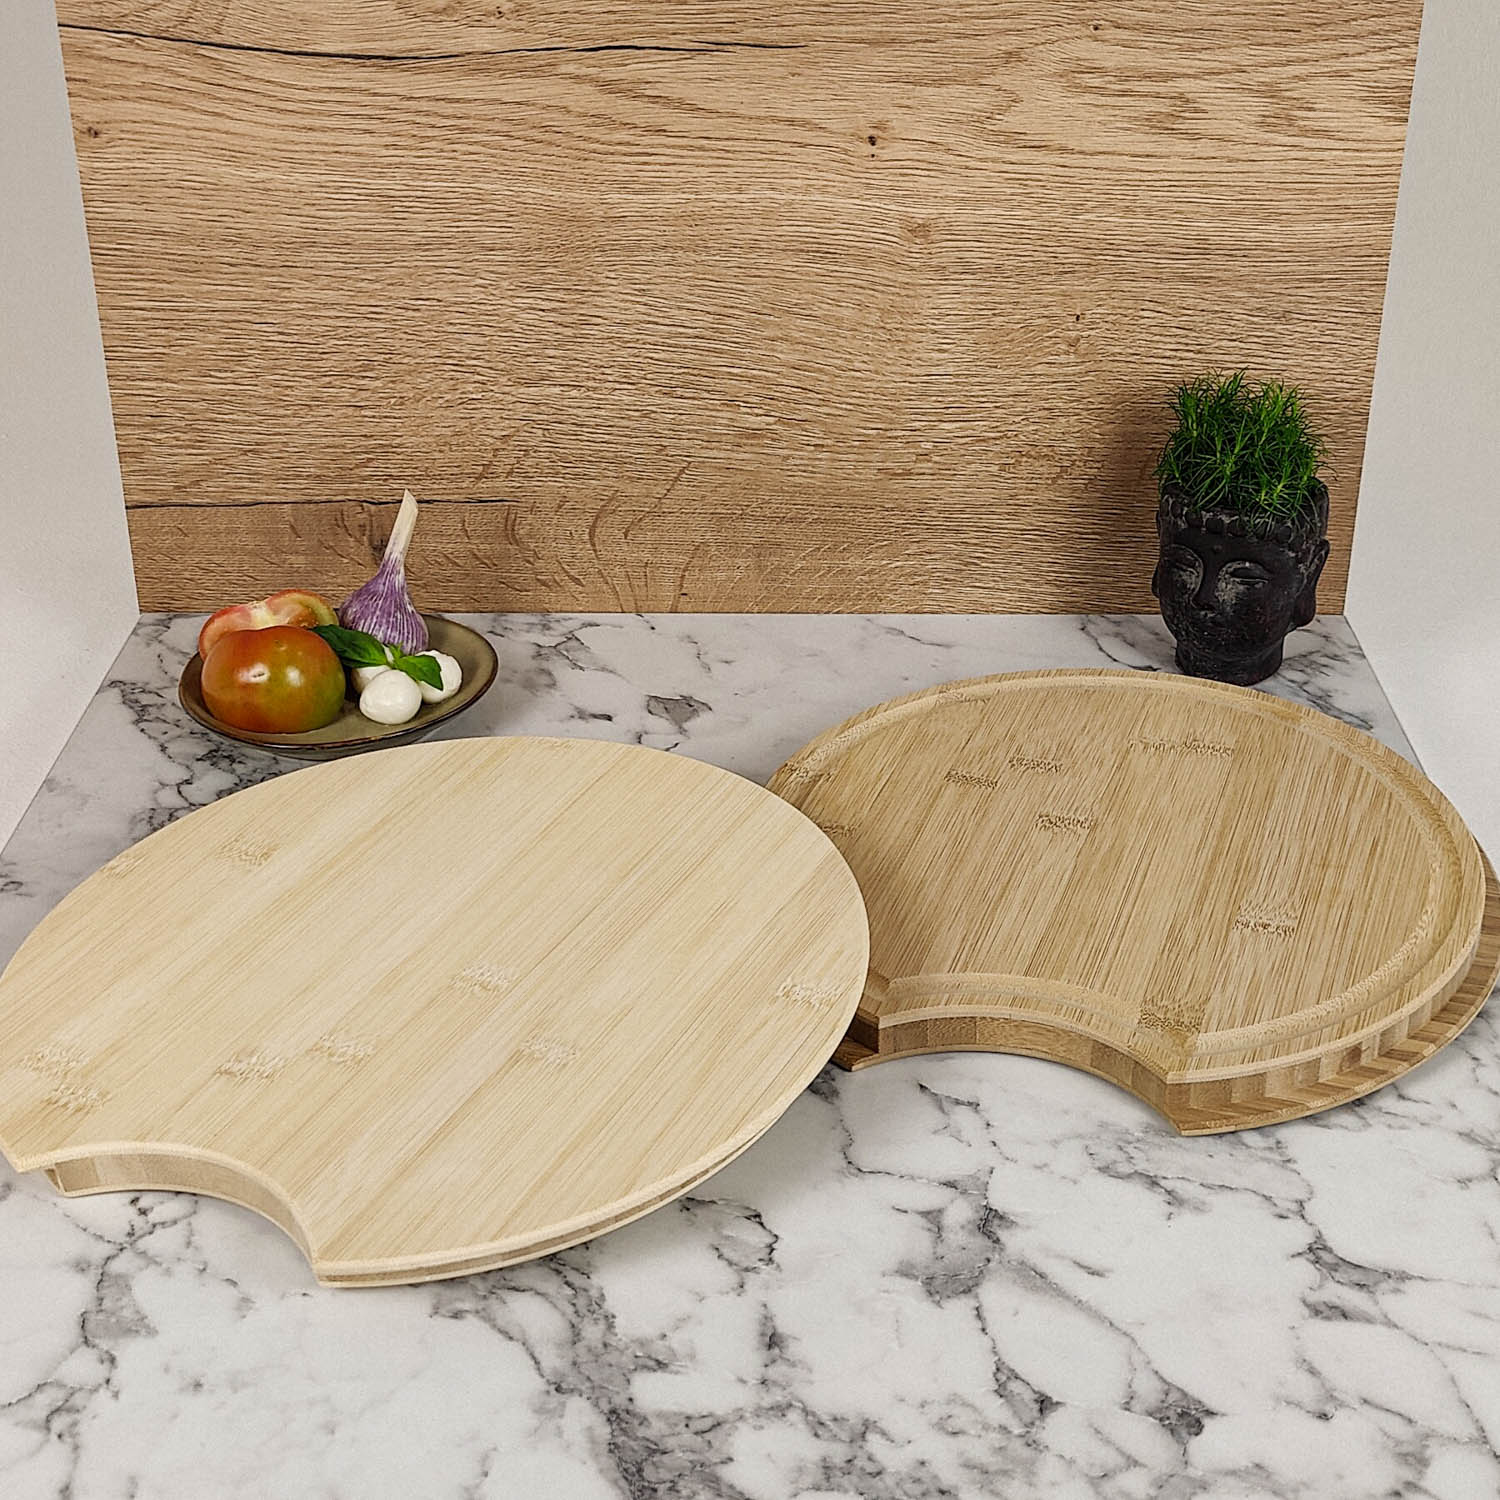 The cutting board with sink cover for Hobby models